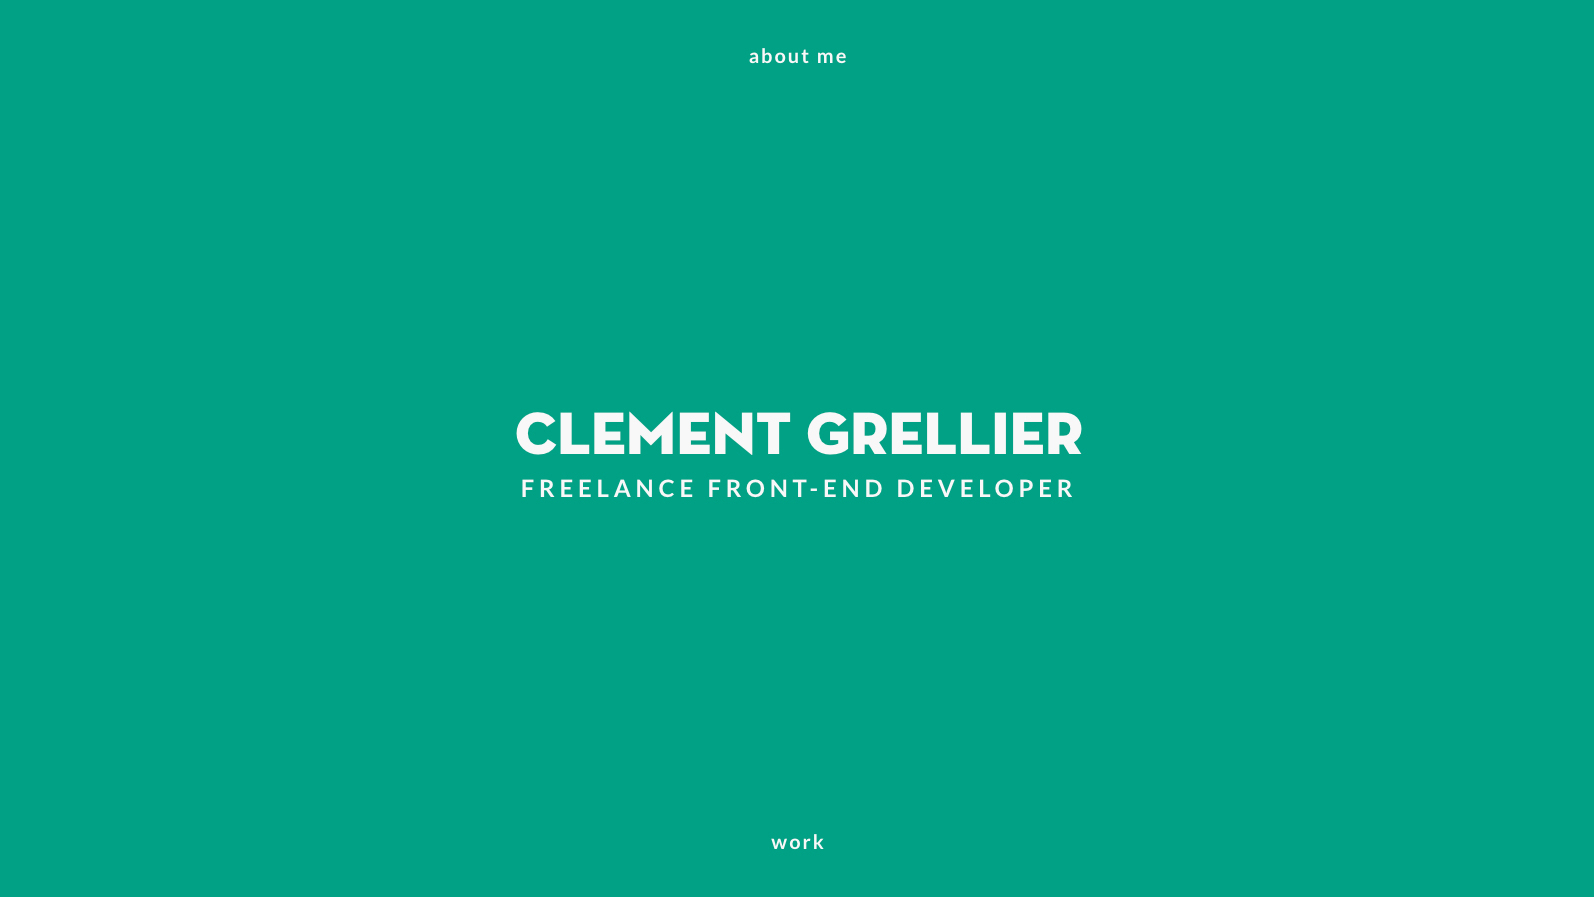 Clement Grellier